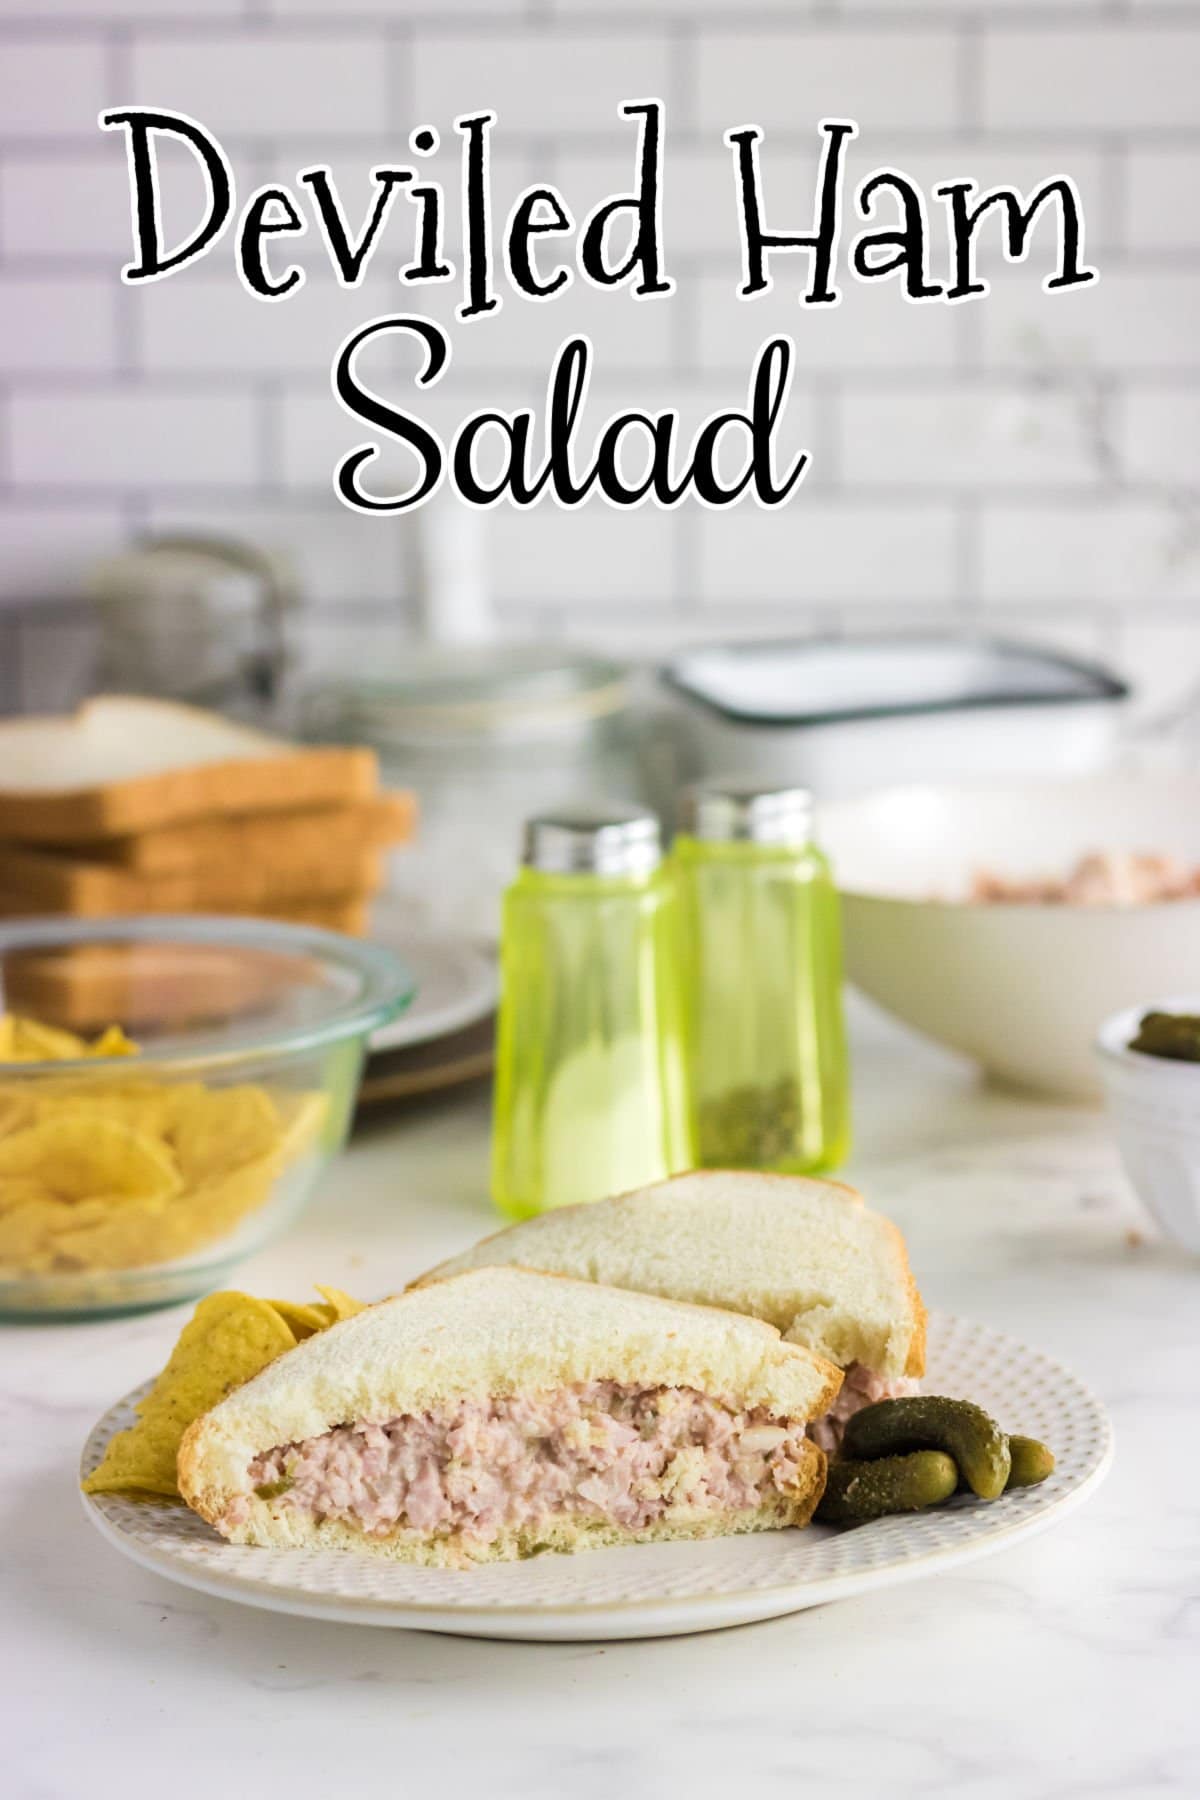 A half ham salad sandwich on a plate with title text overlay.